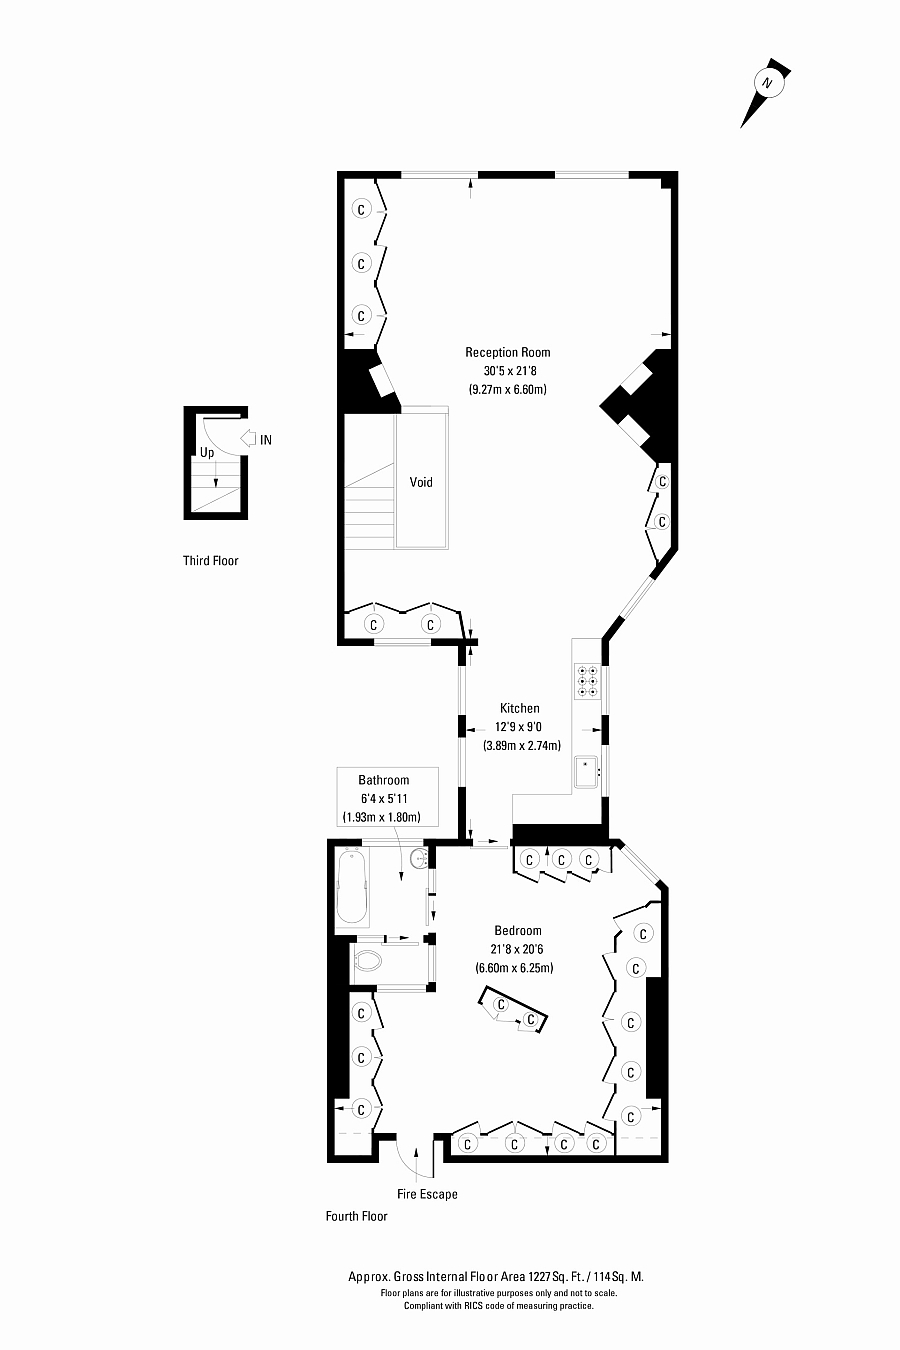 Floor plan of the chic Archer Street Apartment